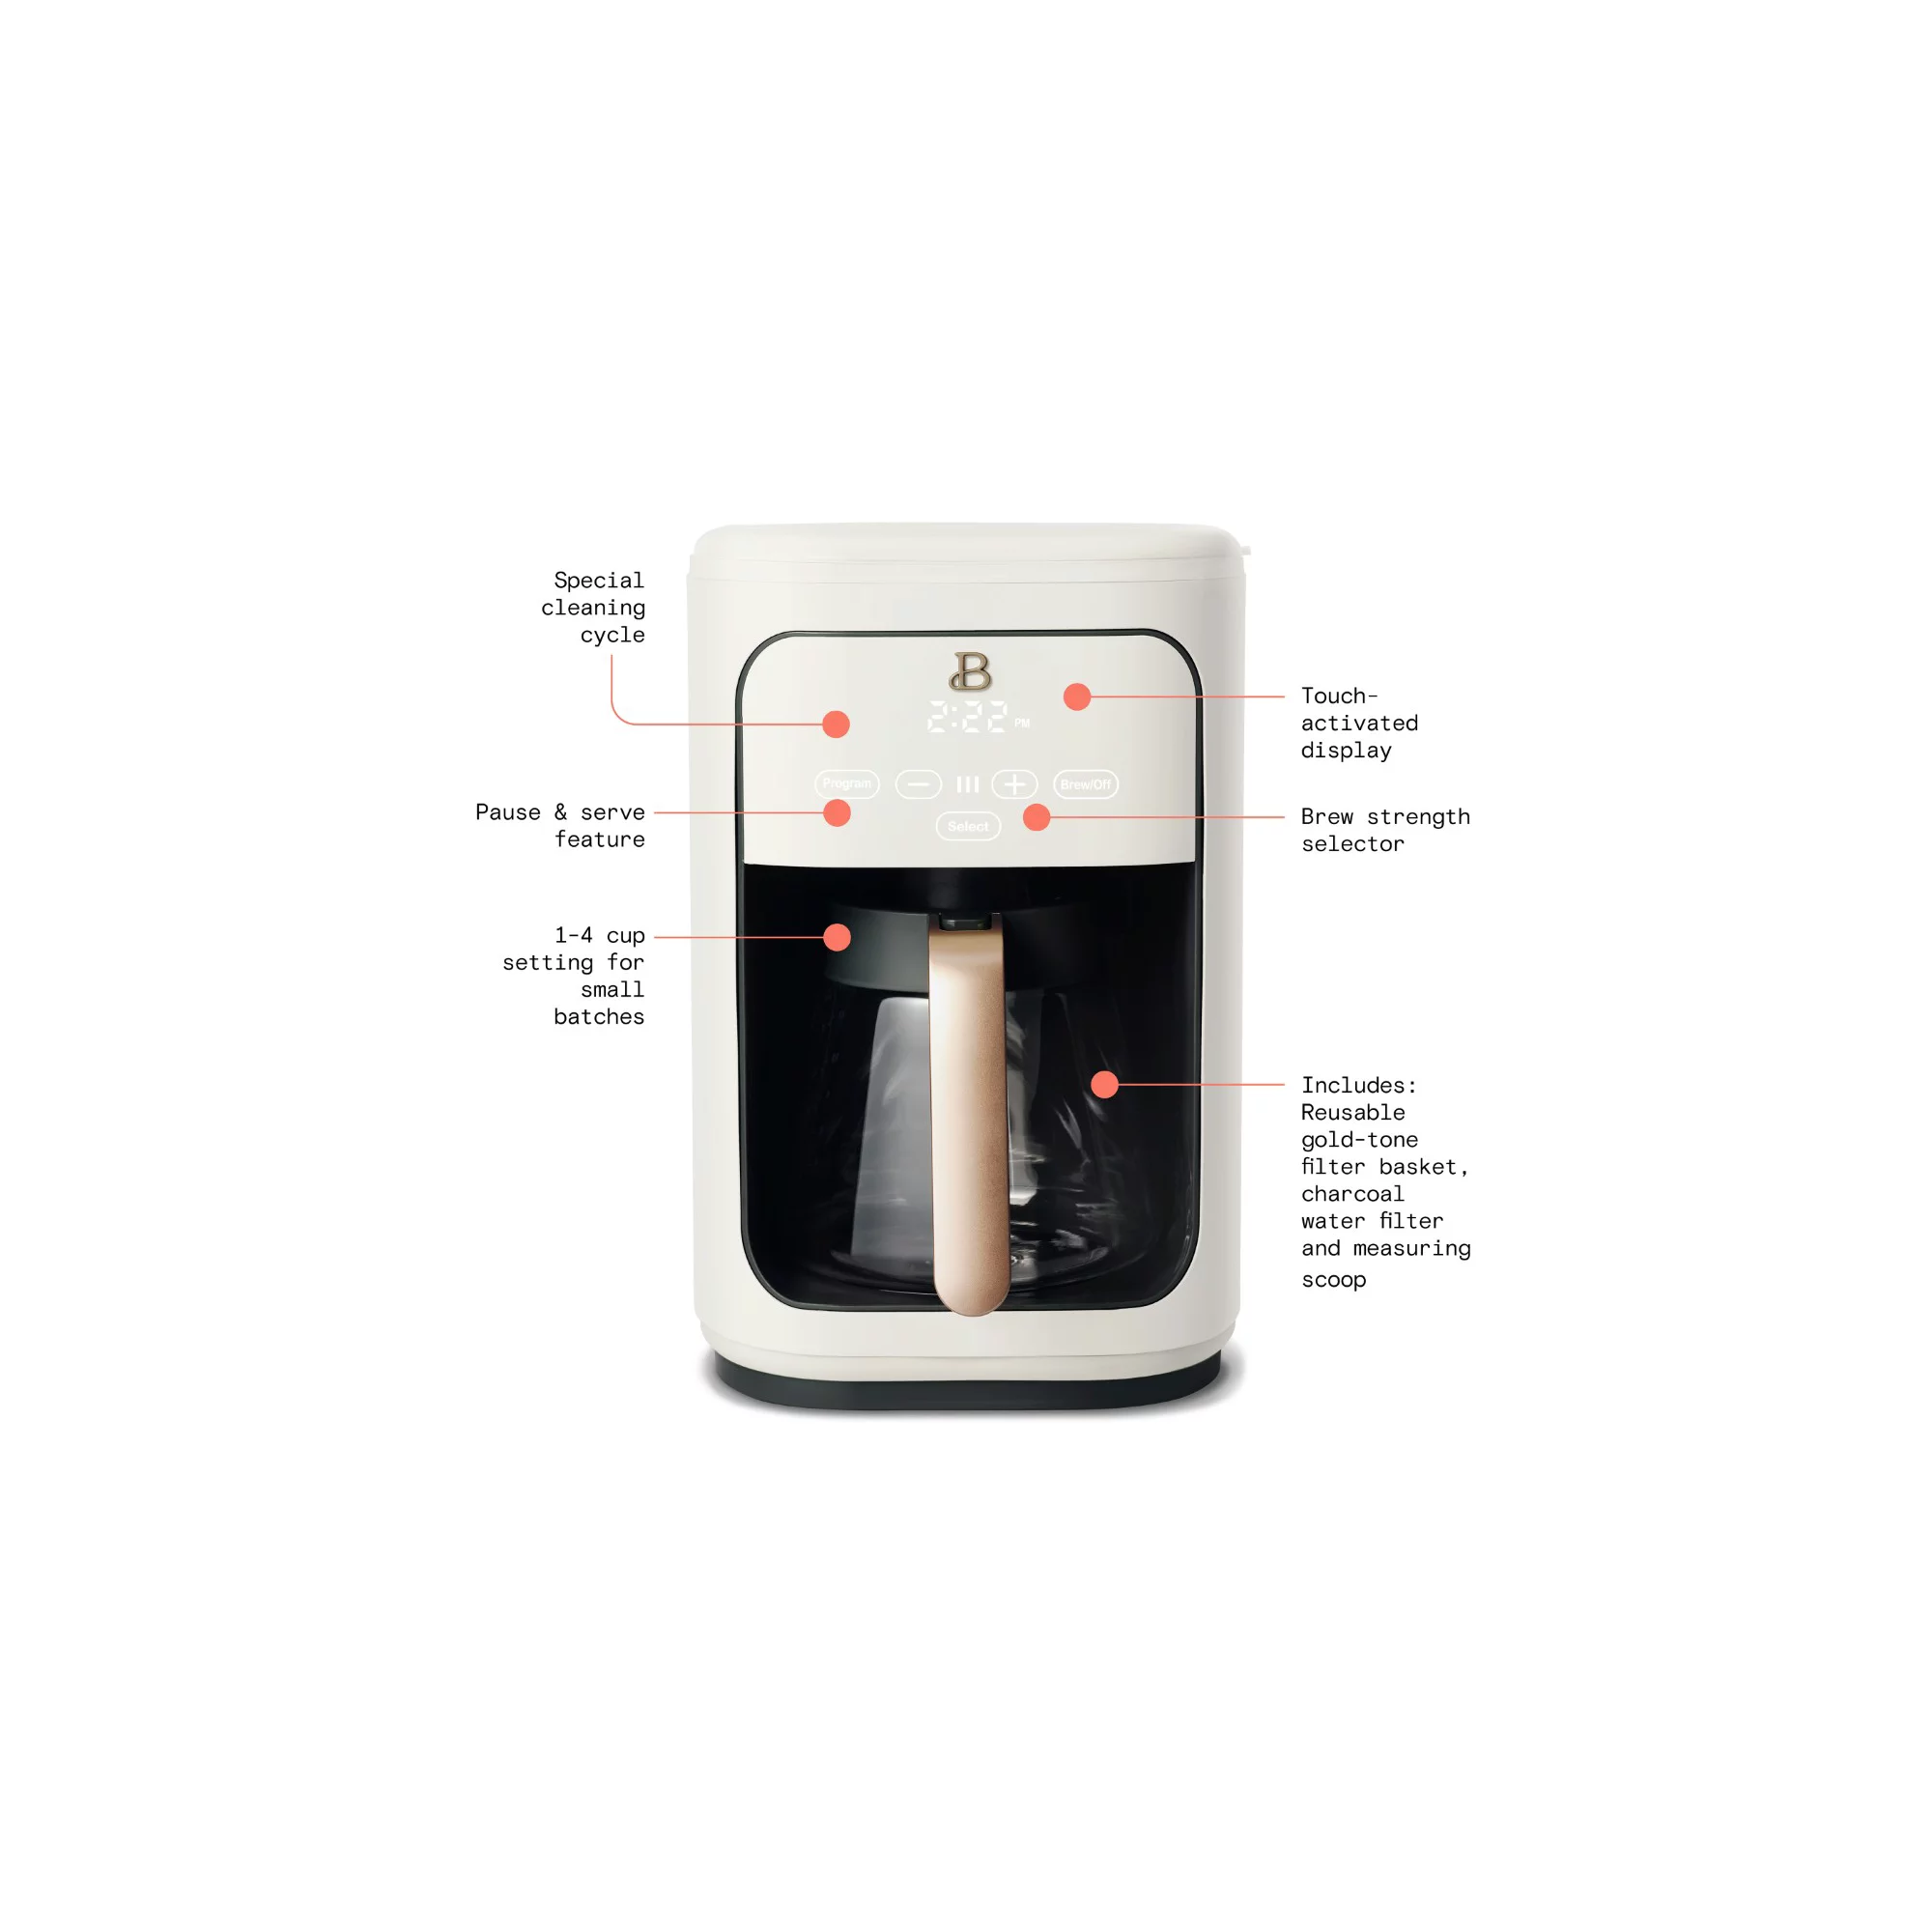 https://discounttoday.net/wp-content/uploads/2023/02/Beautiful-14-Cup-Programmable-Touchscreen-Coffee-Maker-White-Icing-by-Drew-Barrymore-2.webp